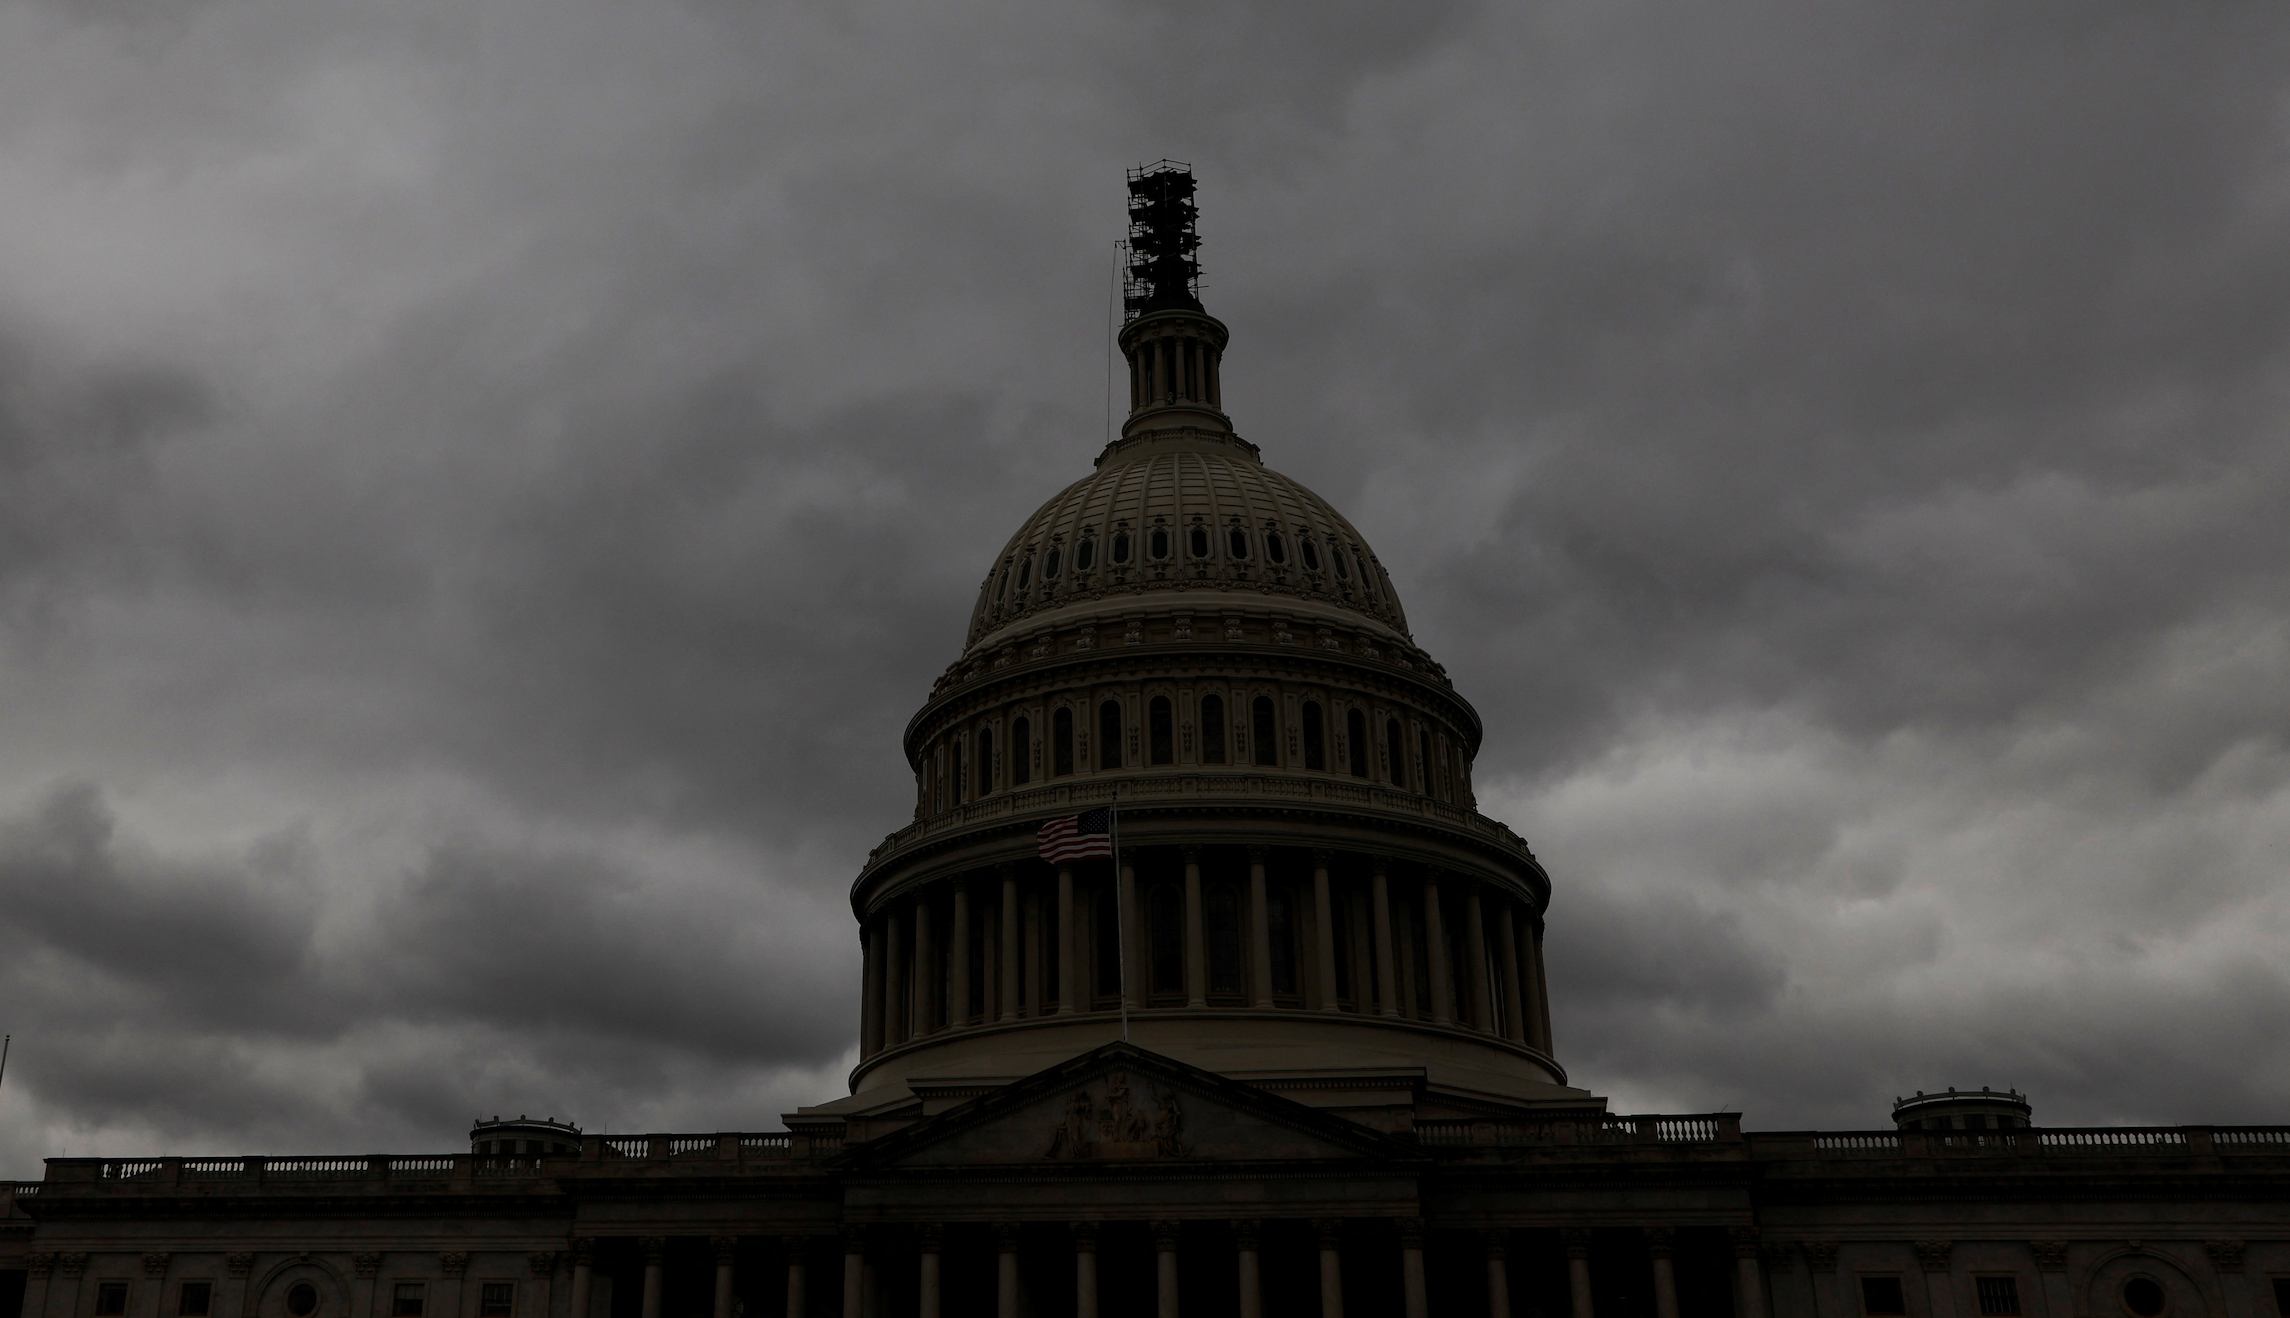 What closes and what stays open in a US government shutdown